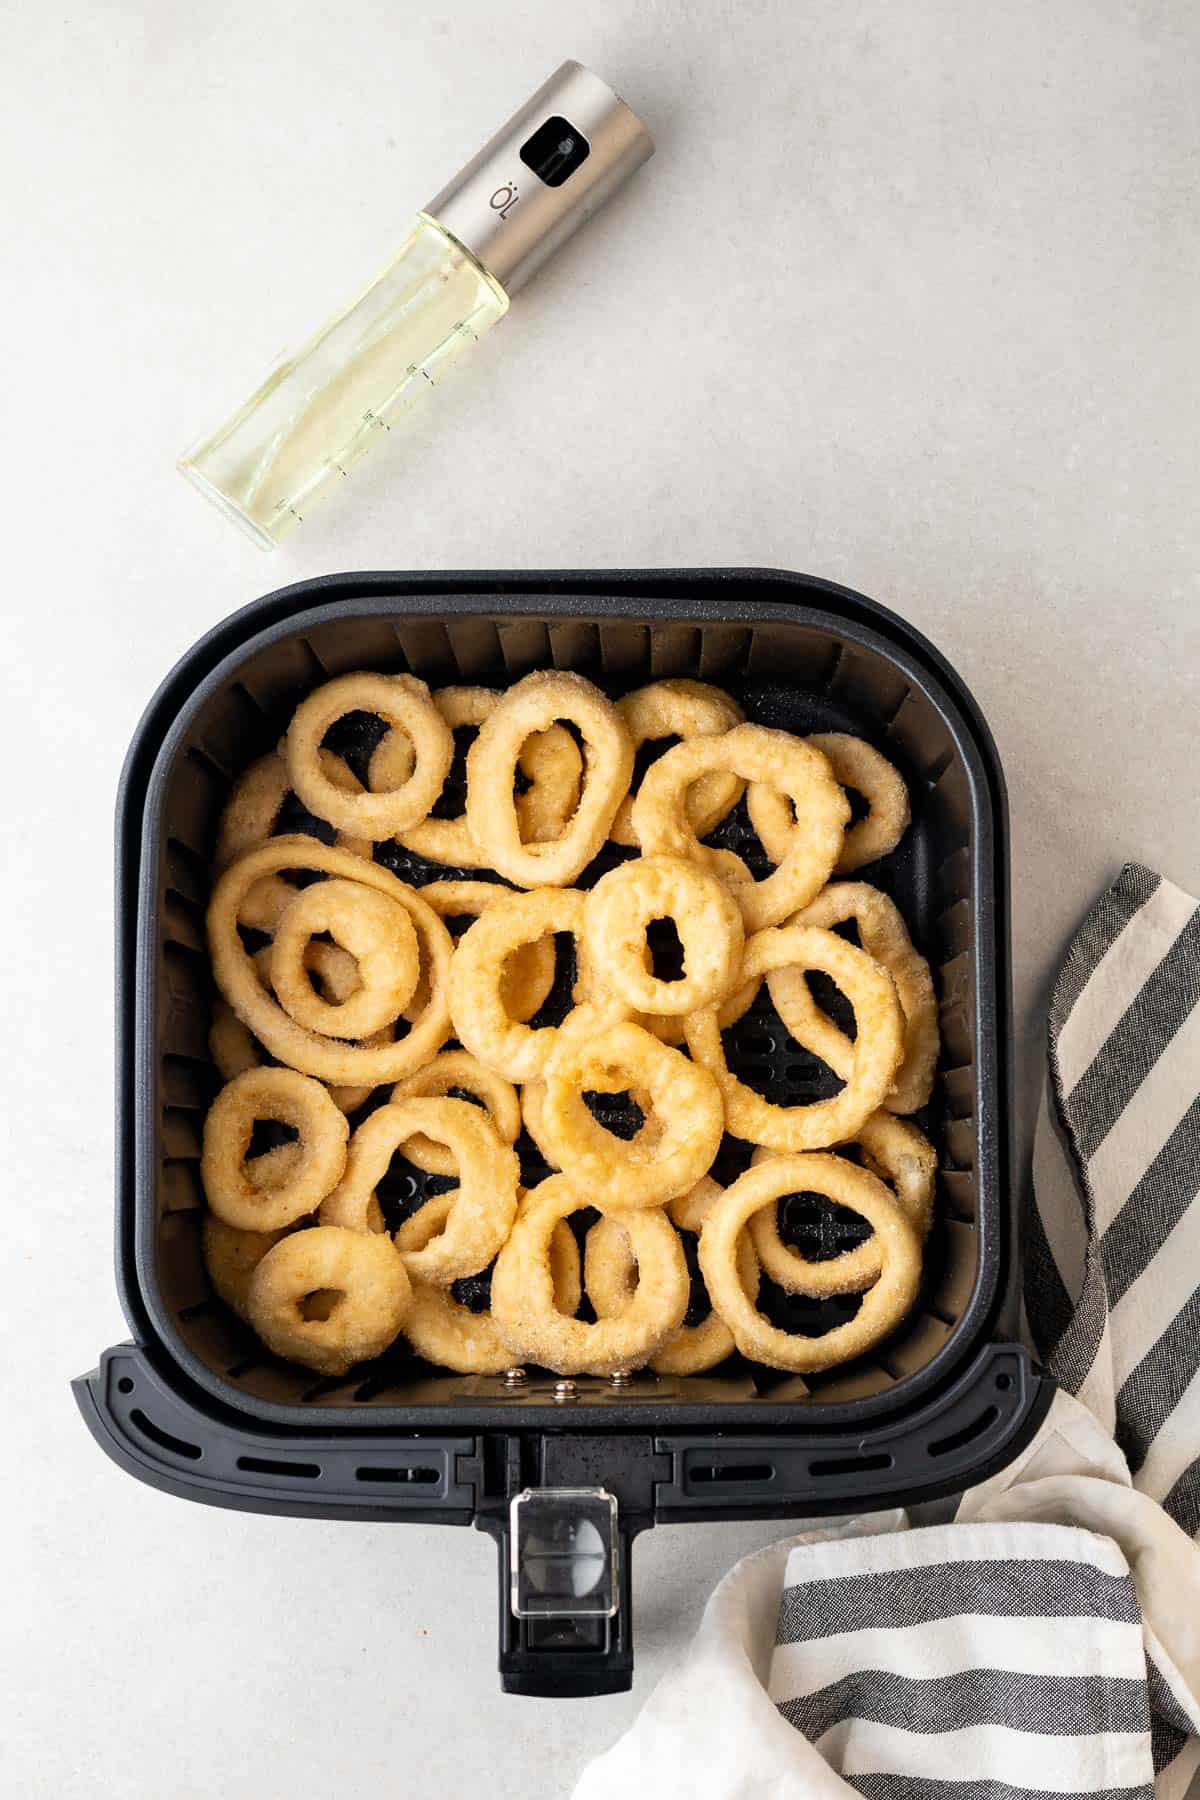 Frozen Onion Rings In Air Fryer - Savoring The Good®